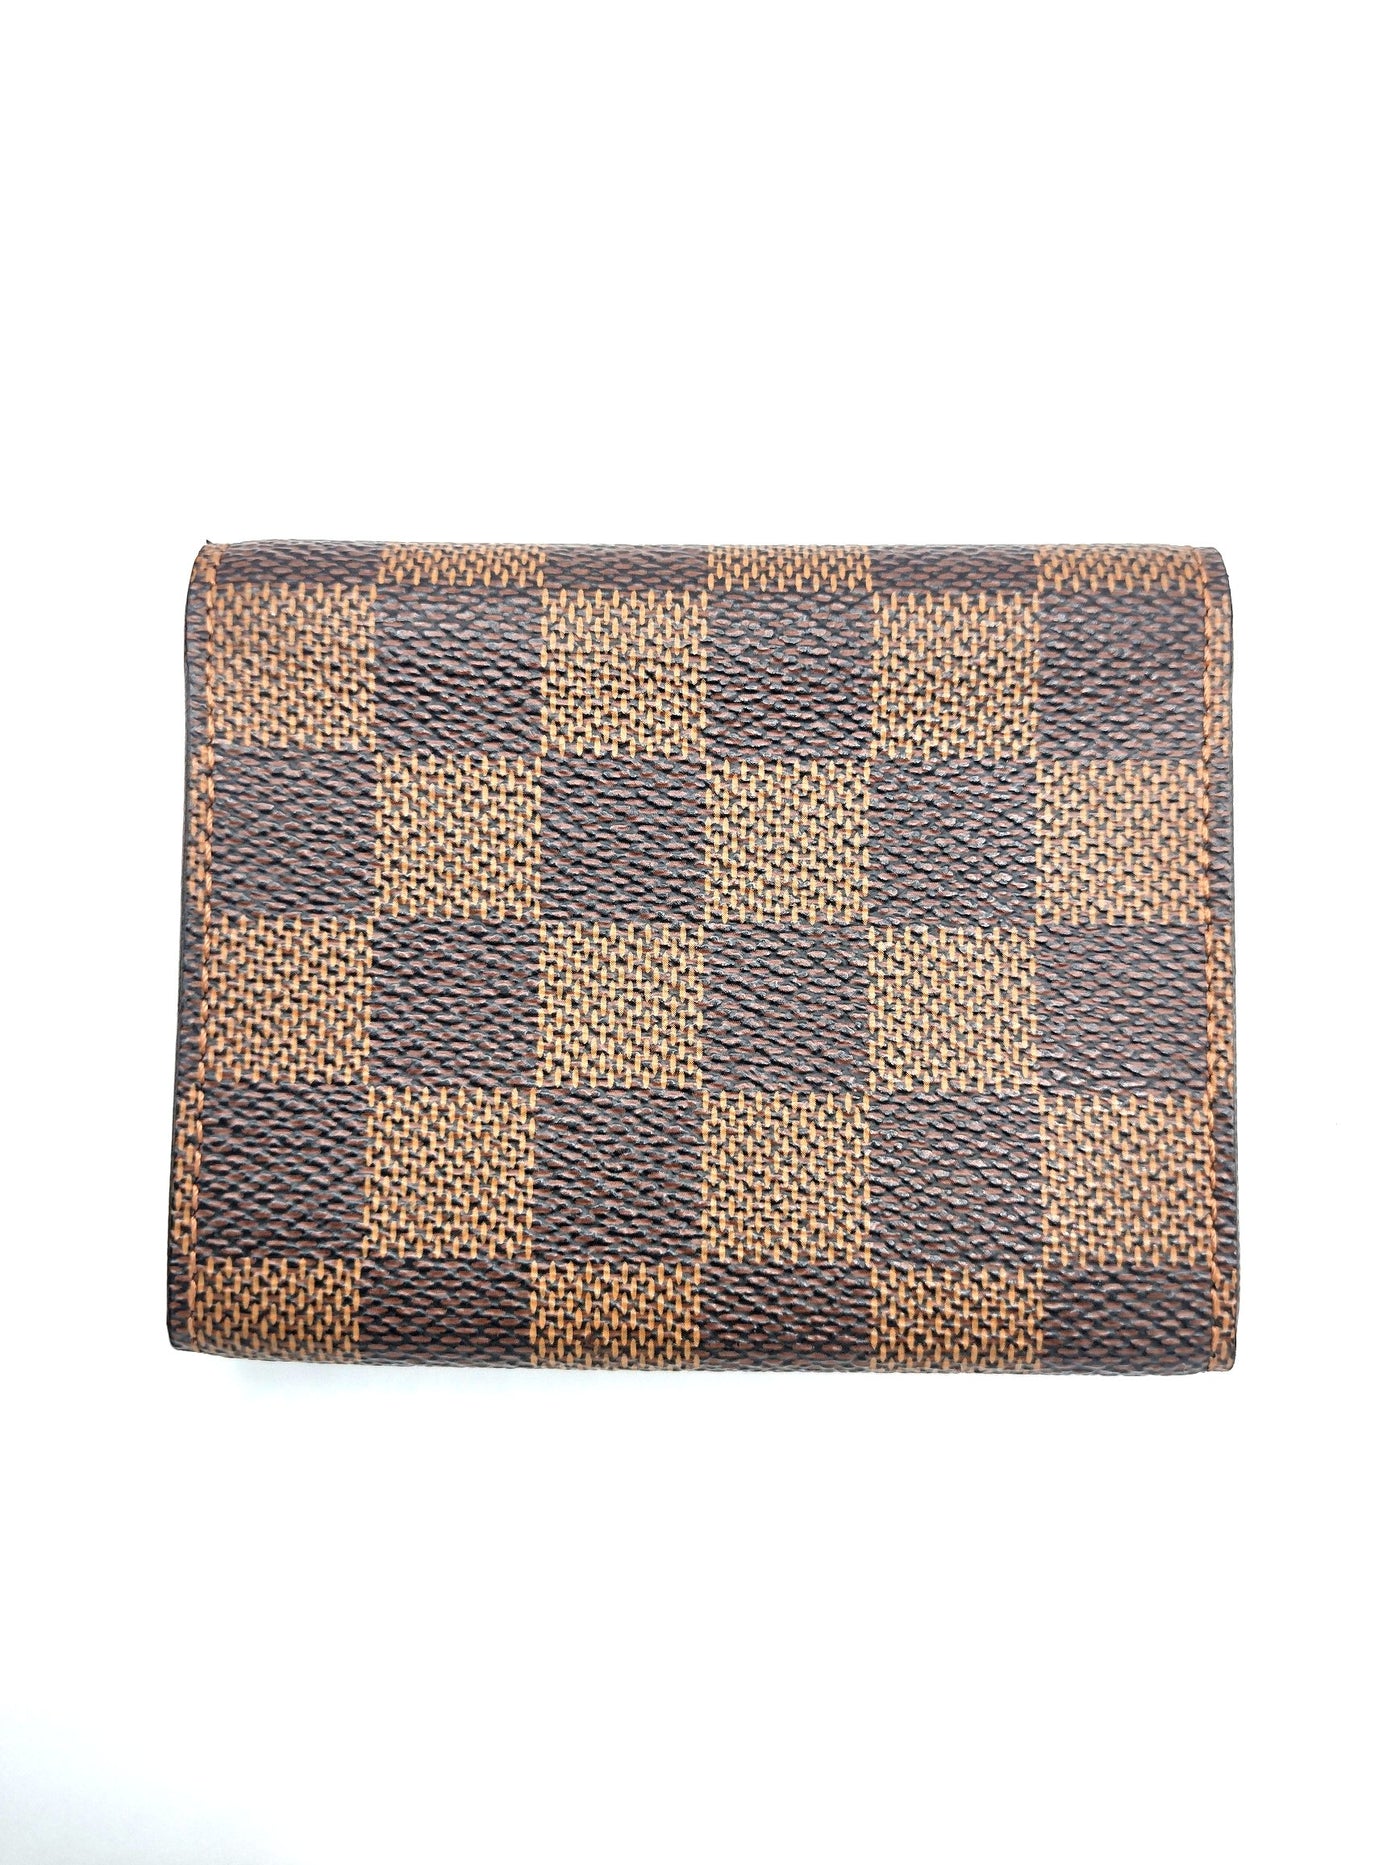 LOUIS VUITTON card holder with box